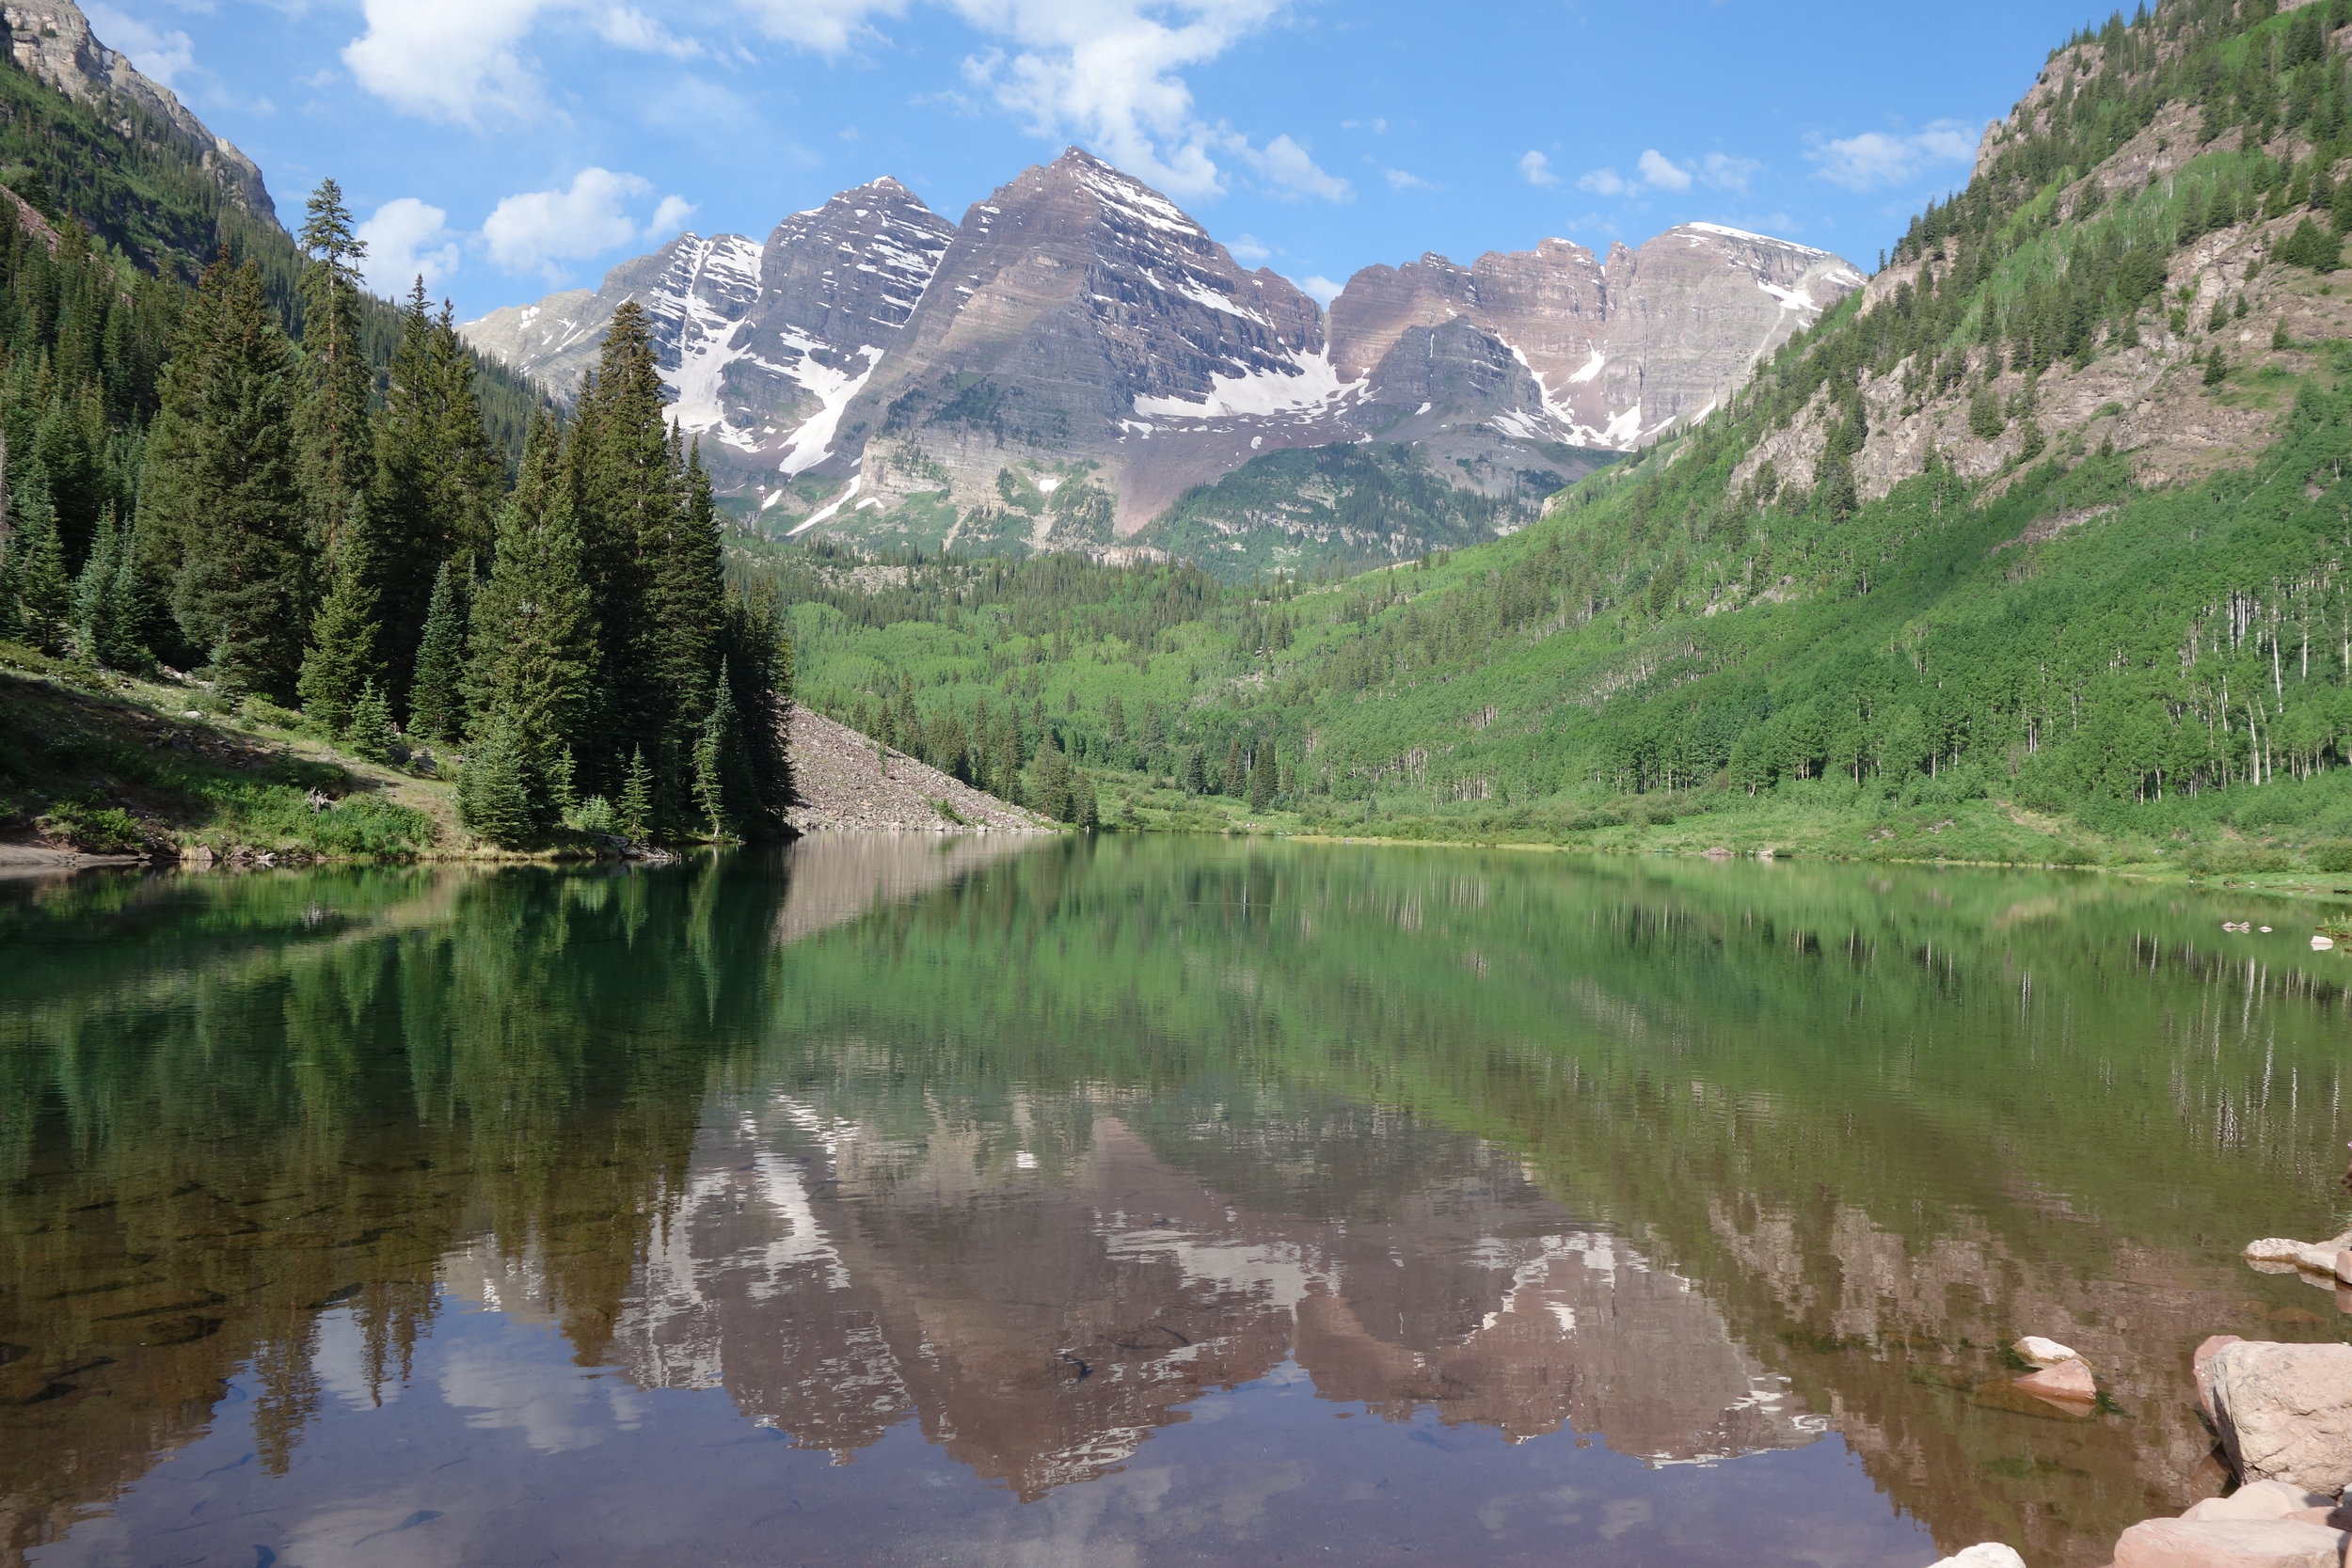 Maroon Lake reflects the images of 14,000-foot-plus Maroon Peak and North Maroon Peak; perhaps this is the most photographed scene in the Rocky Mountains.